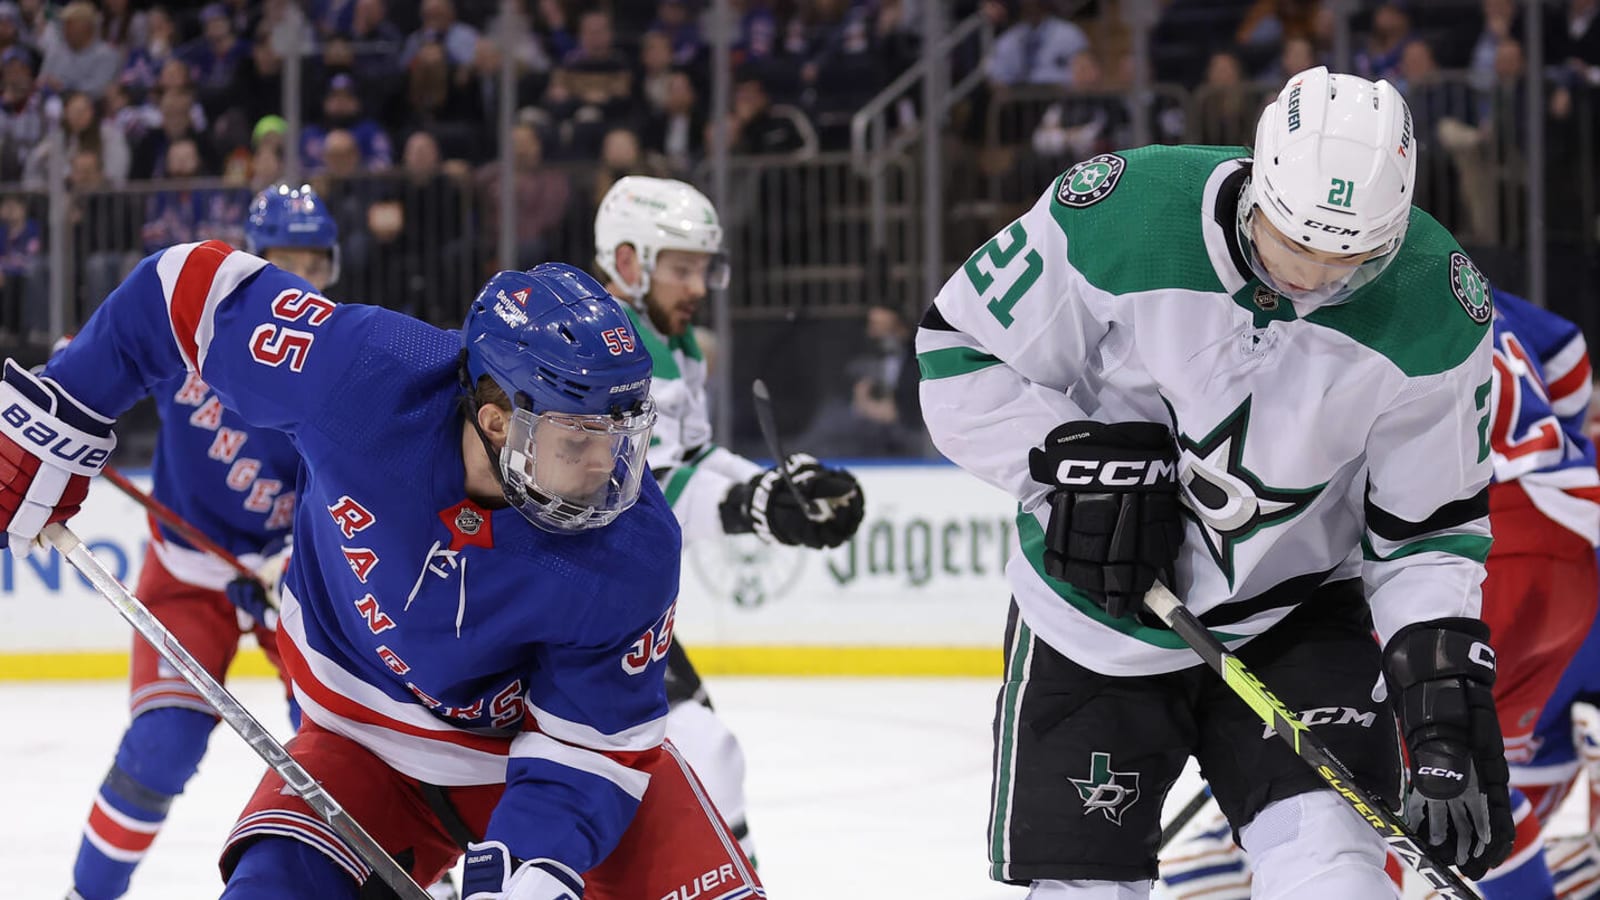 Rangers hang on to beat Capitals, end 4-game skid